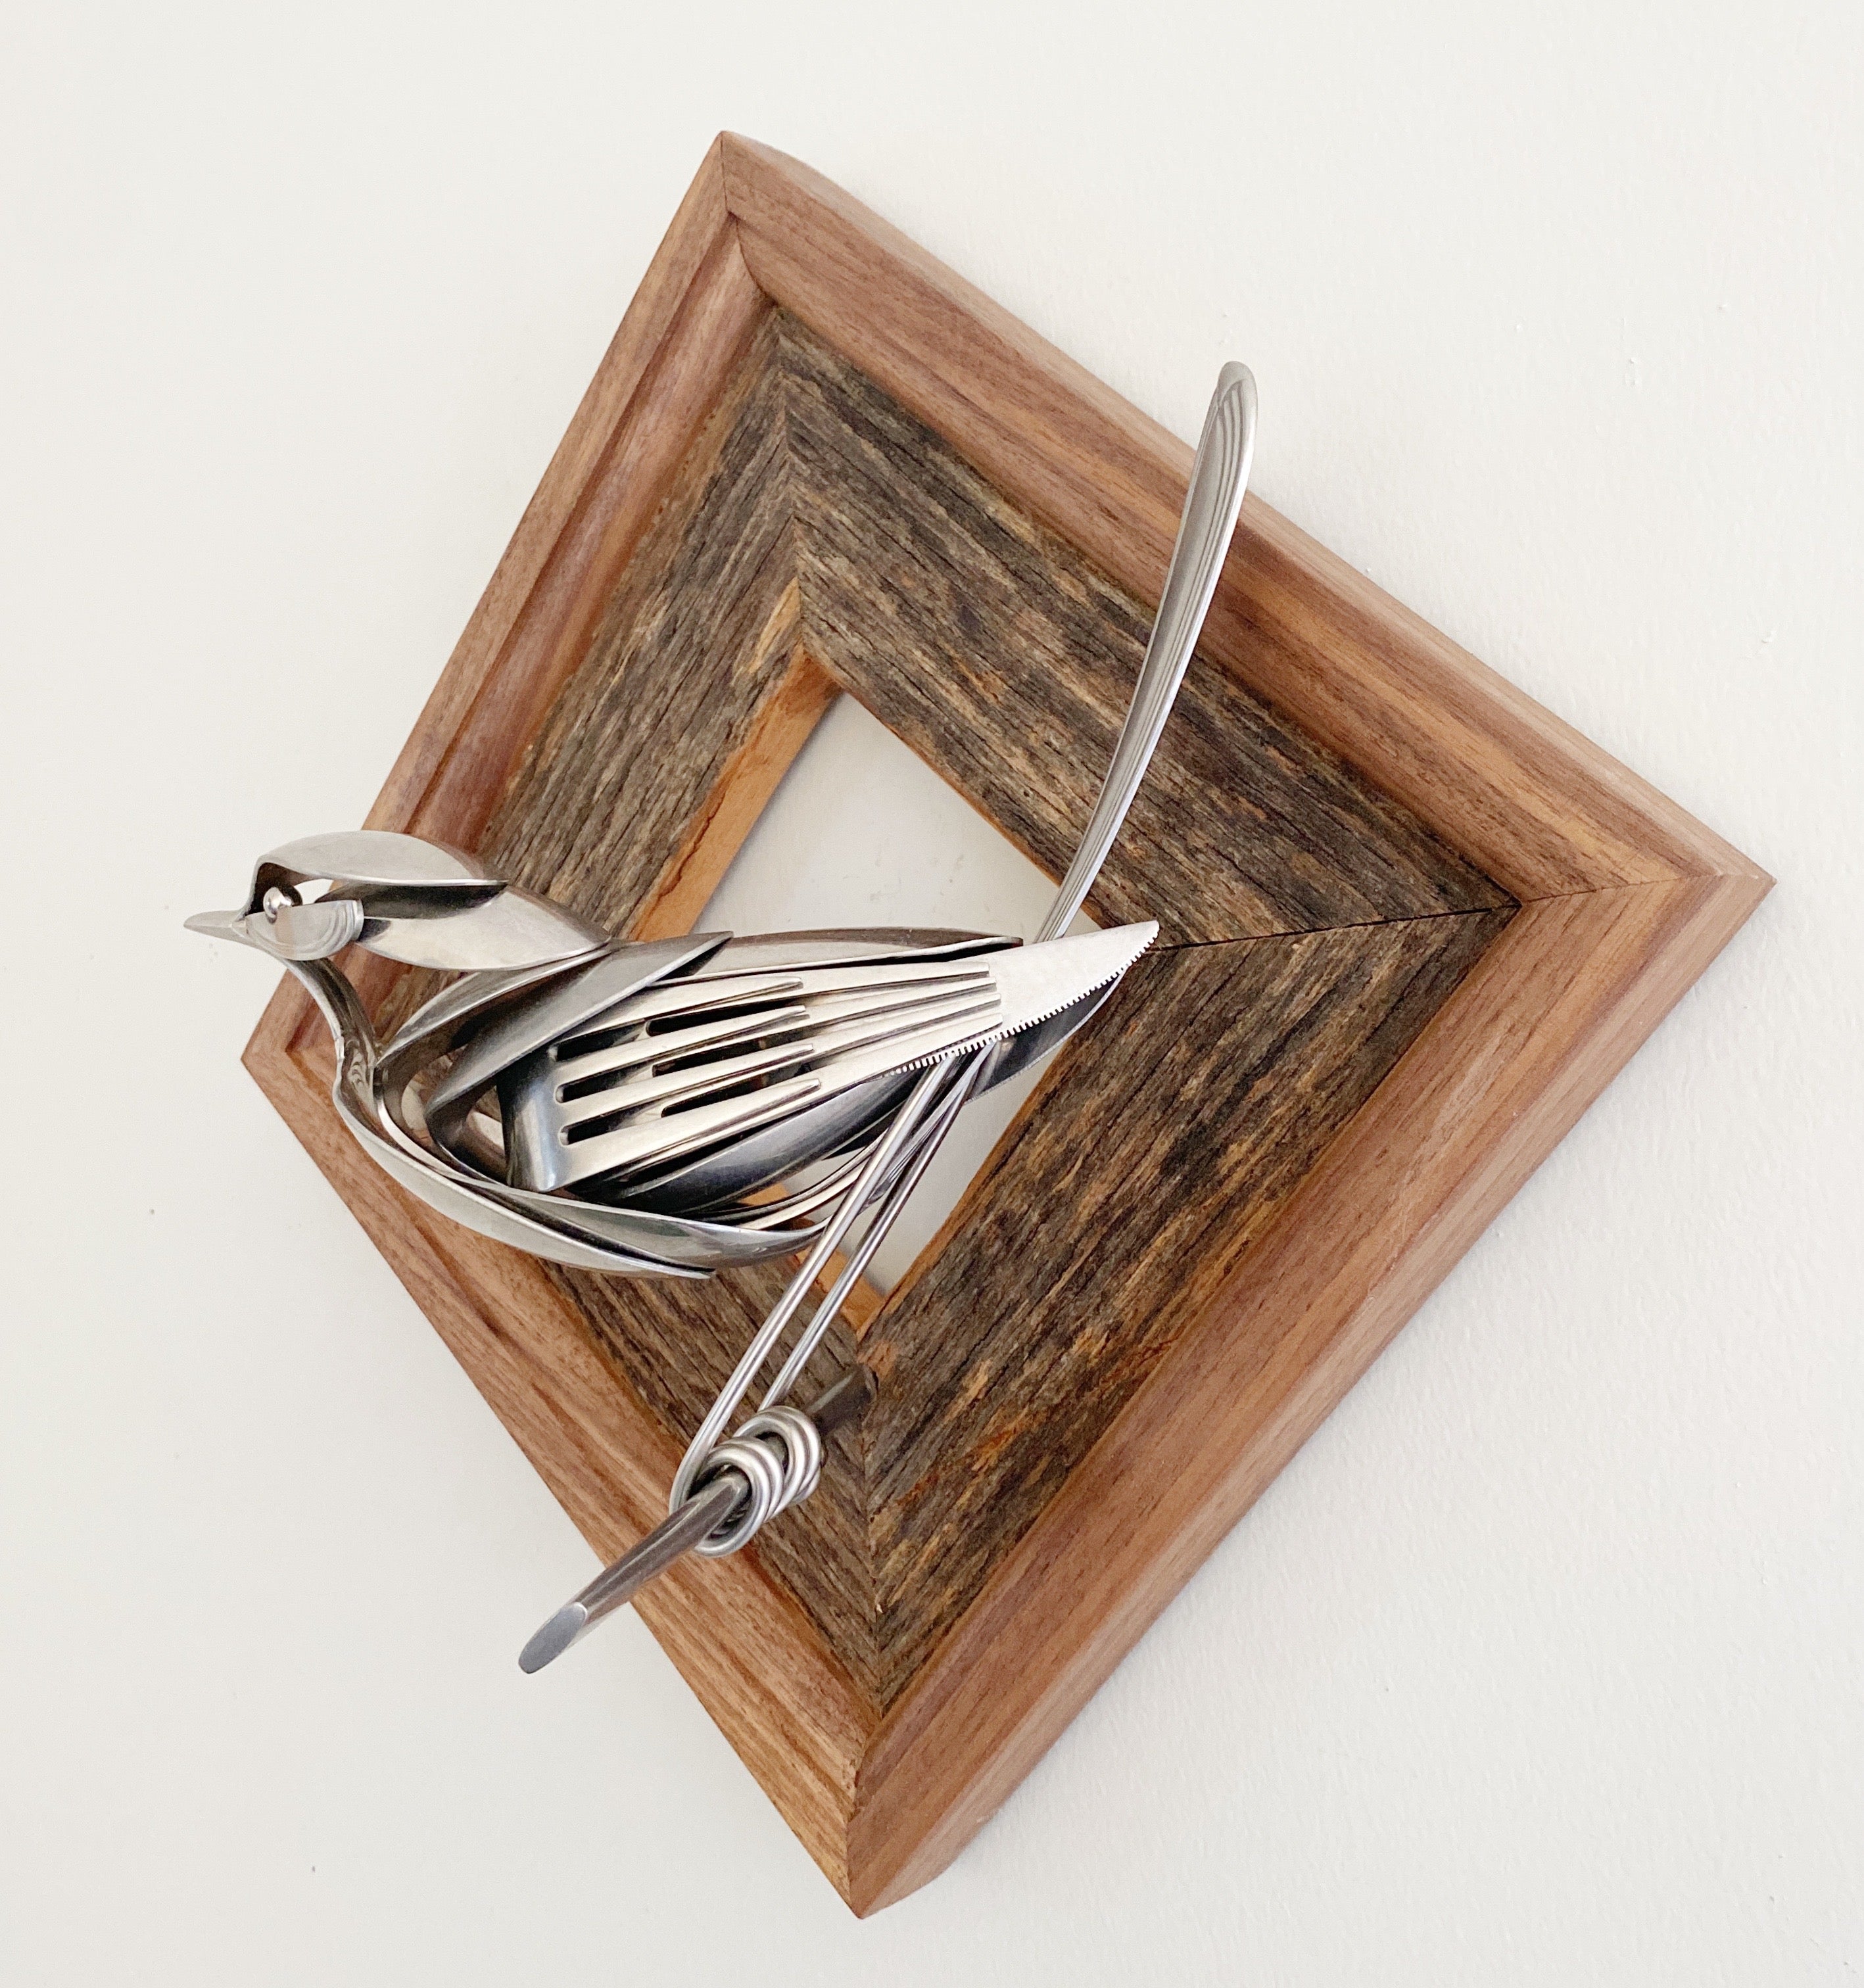 "Charlotte" - Upcycled Metal Bird Sculpture